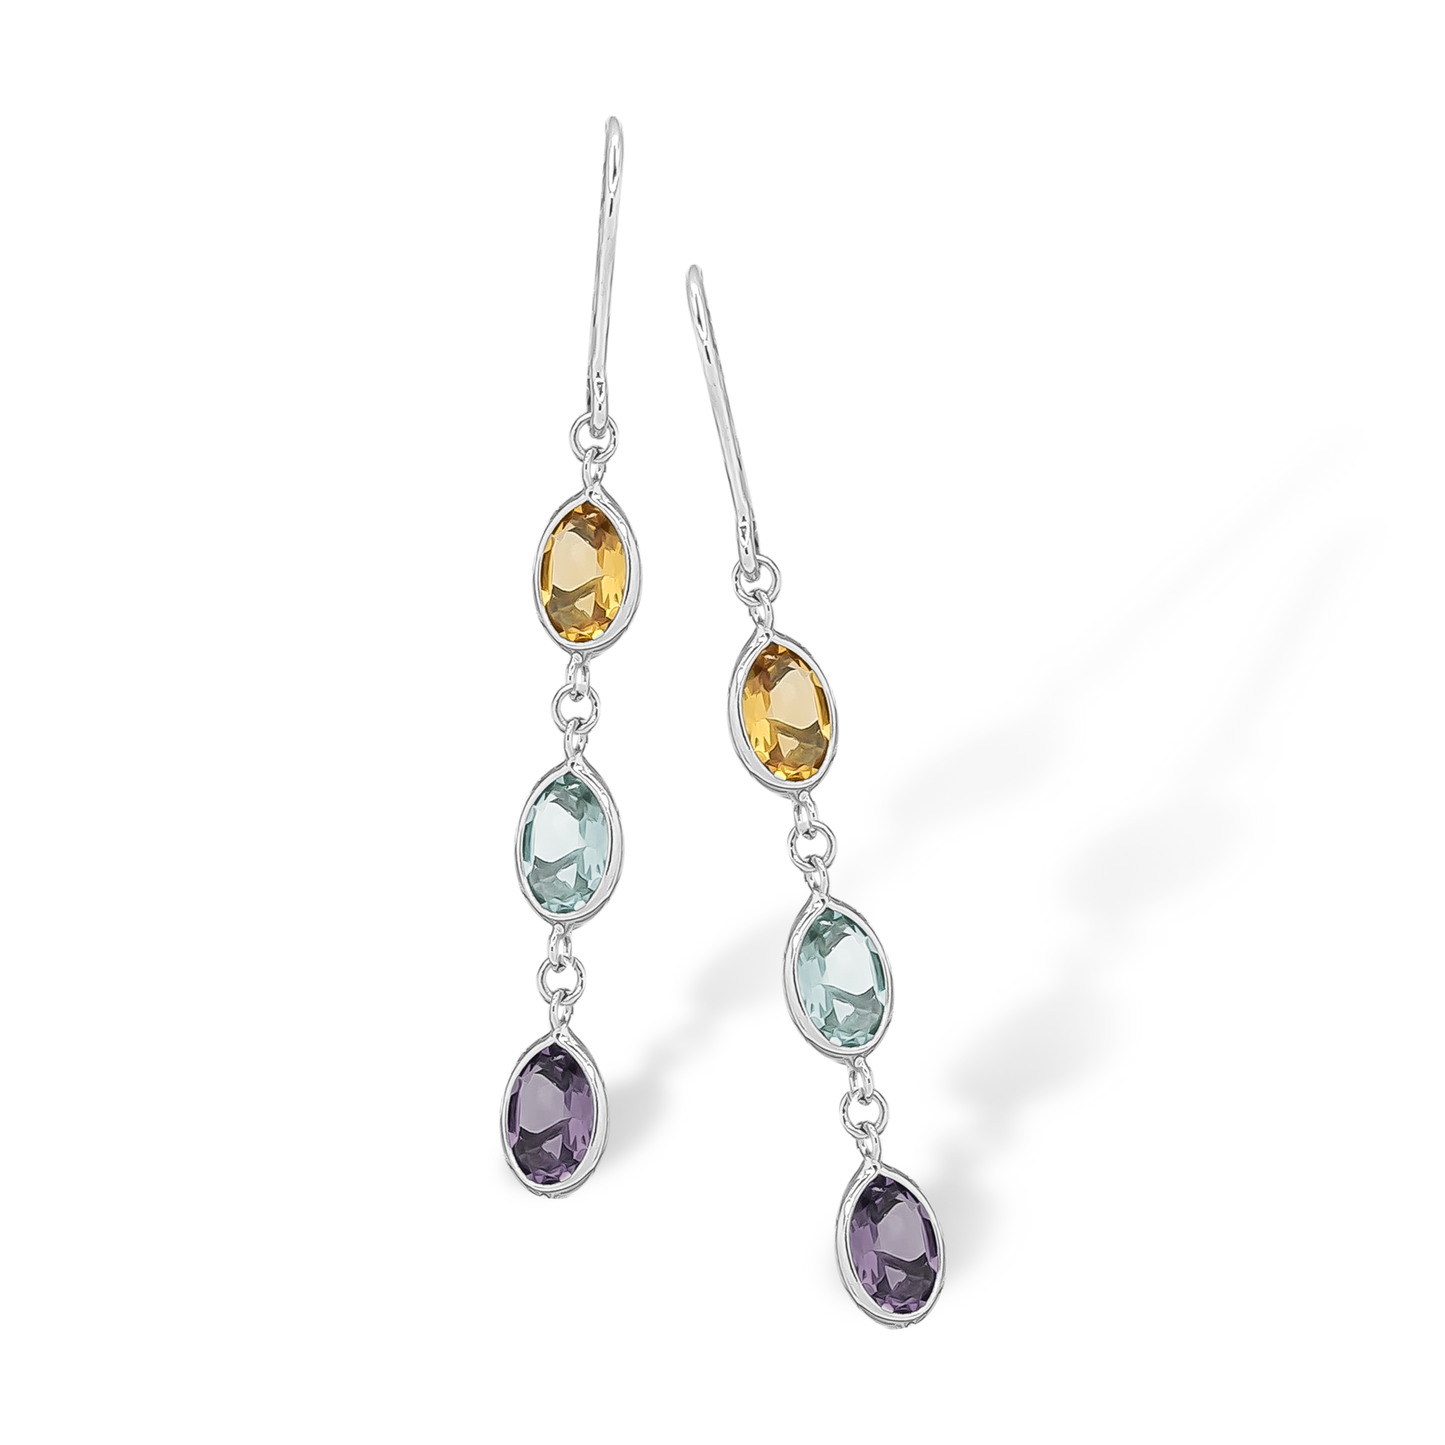 Tutti Frutti Medium Oval Rounded Gemstone Earrings in 9ct White Gold